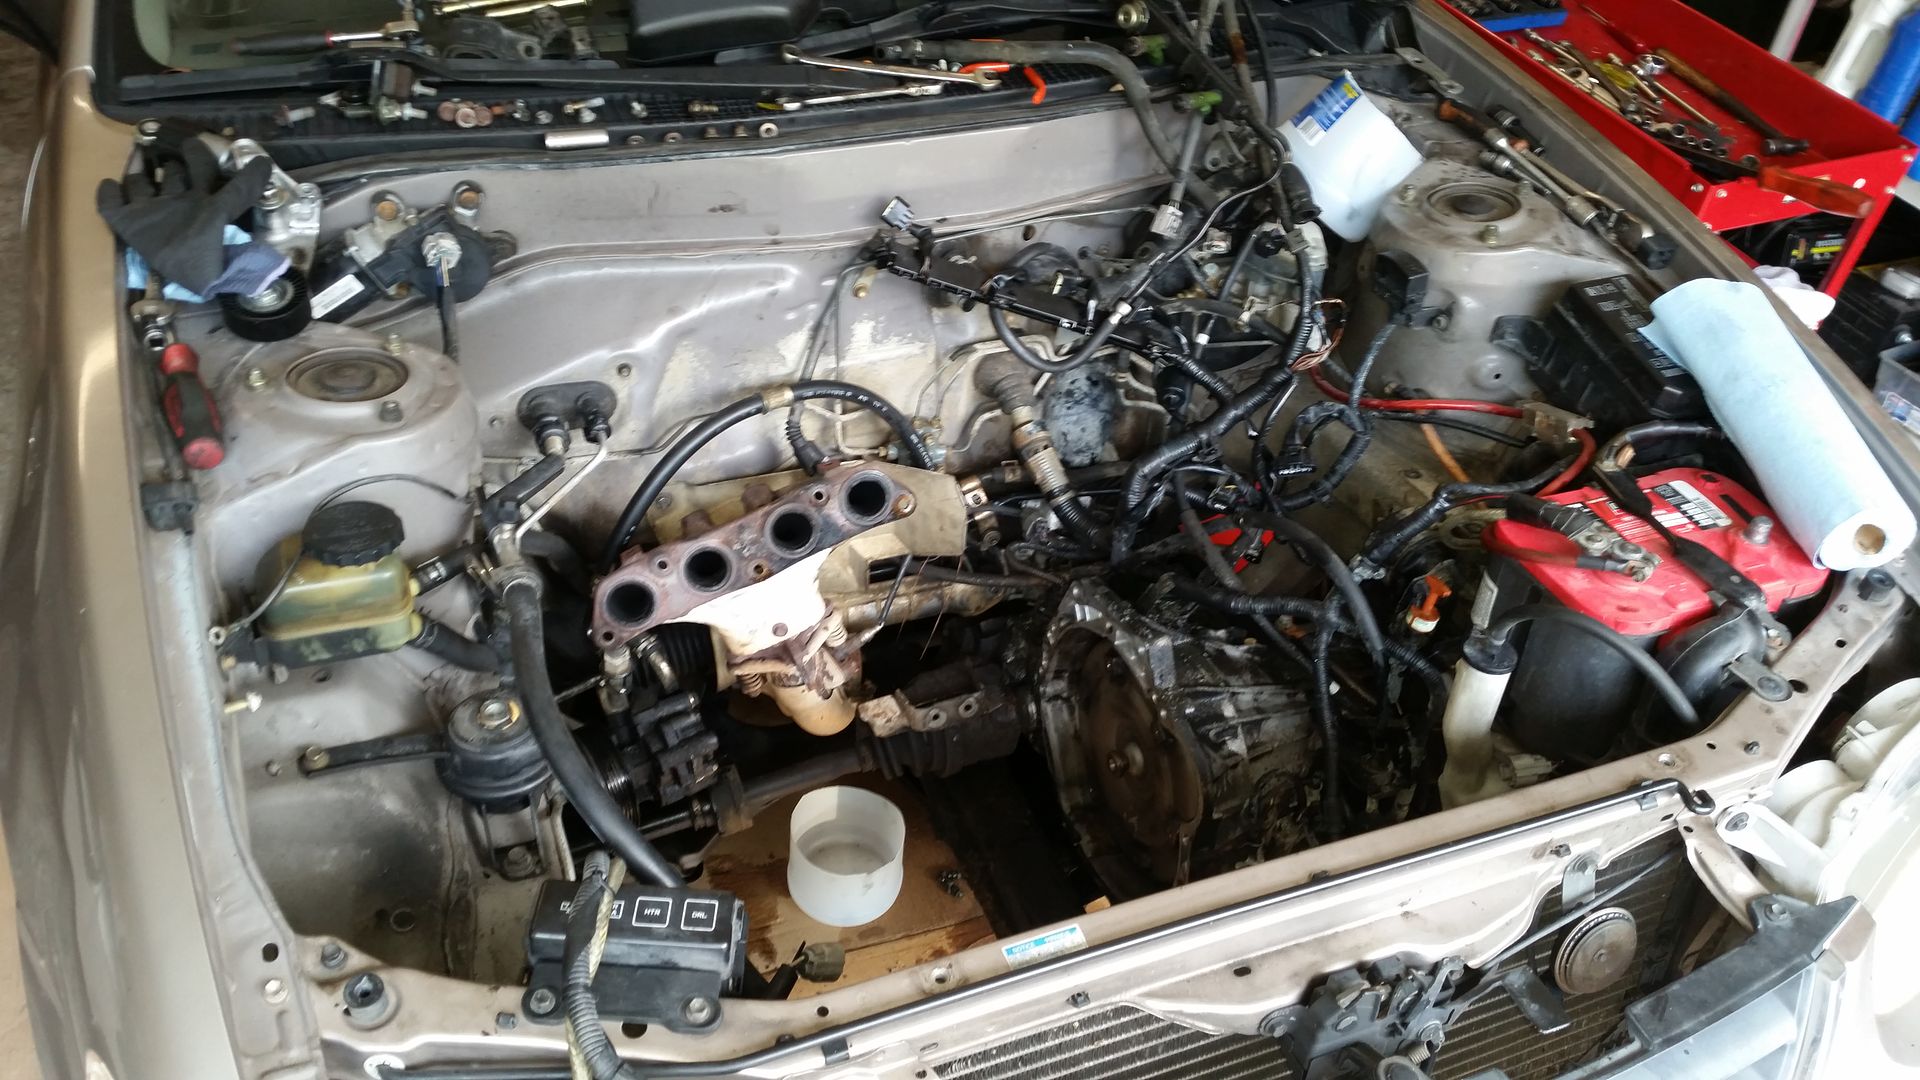 DIY: How to Remove an Engine | Toyota Nation Forum